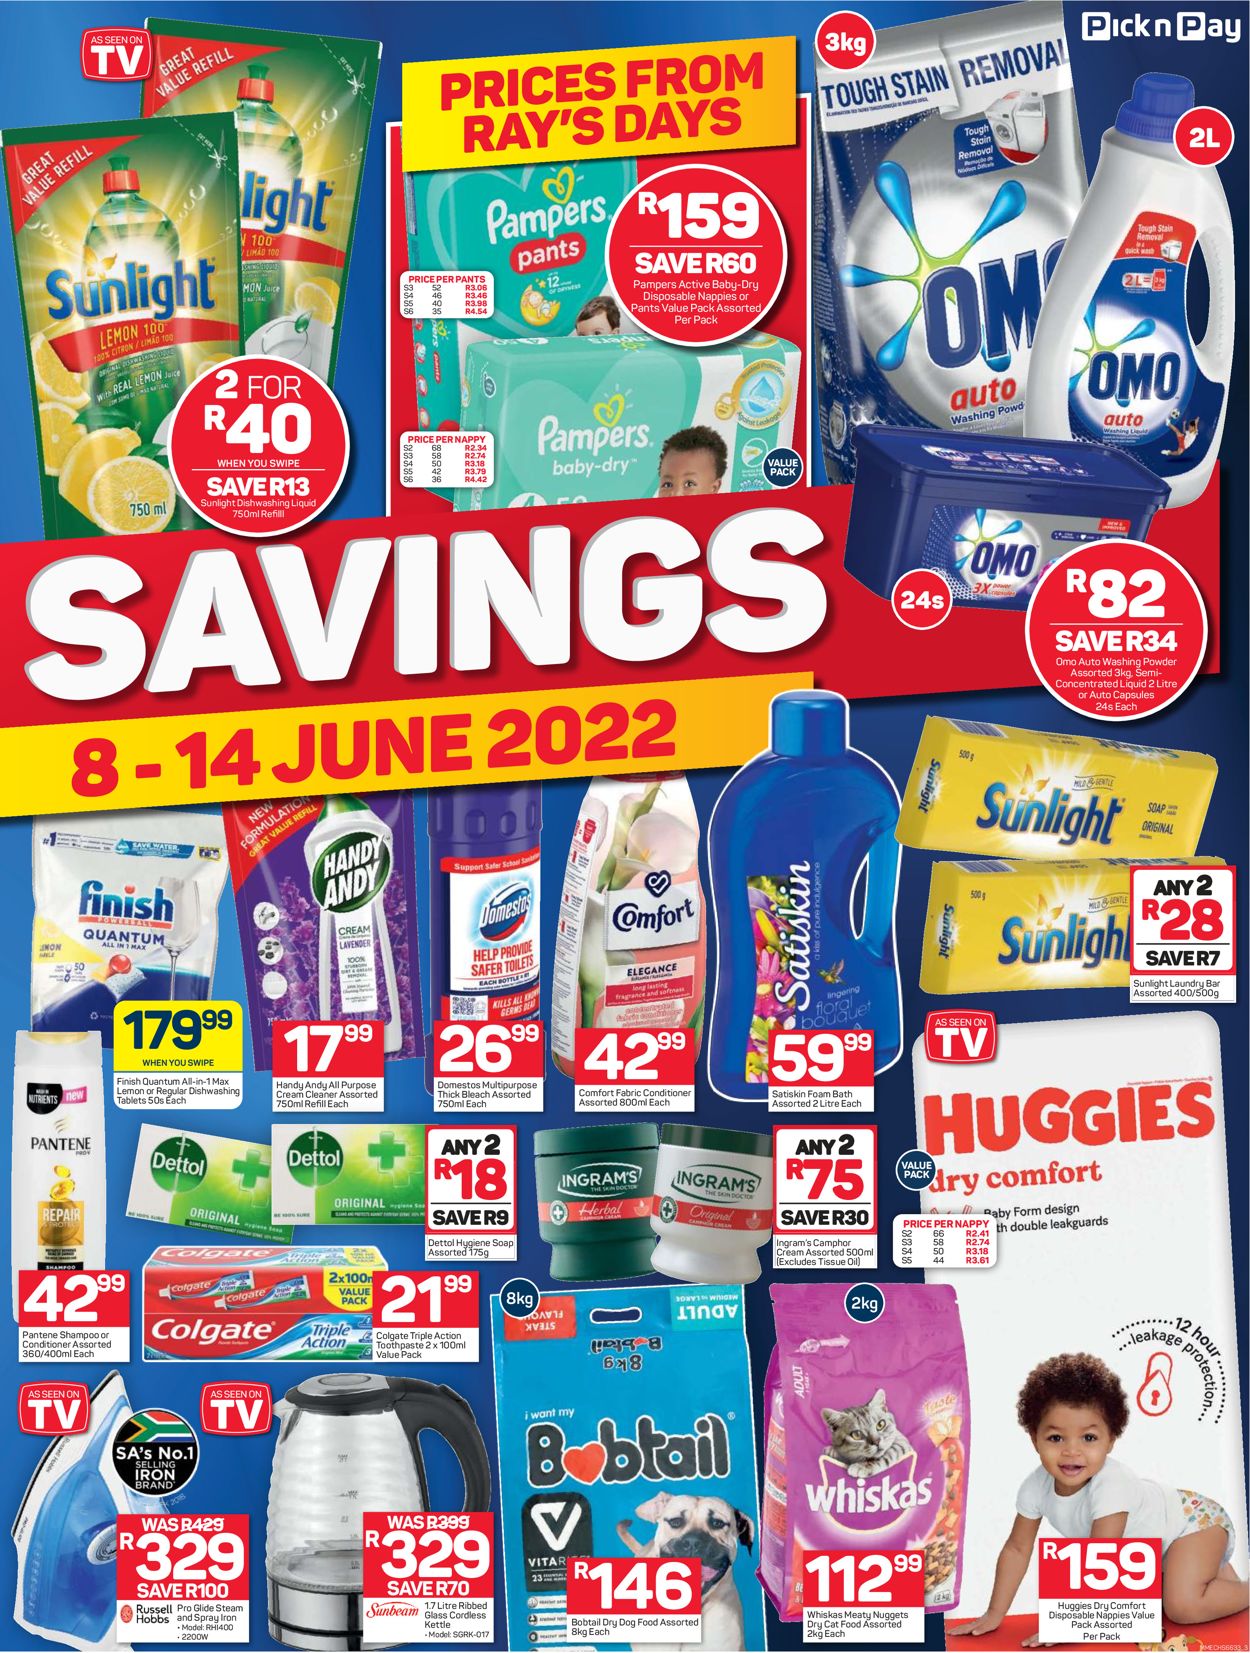 Pick n Pay Catalogue - 2022/06/08-2022/06/14 (Page 4)